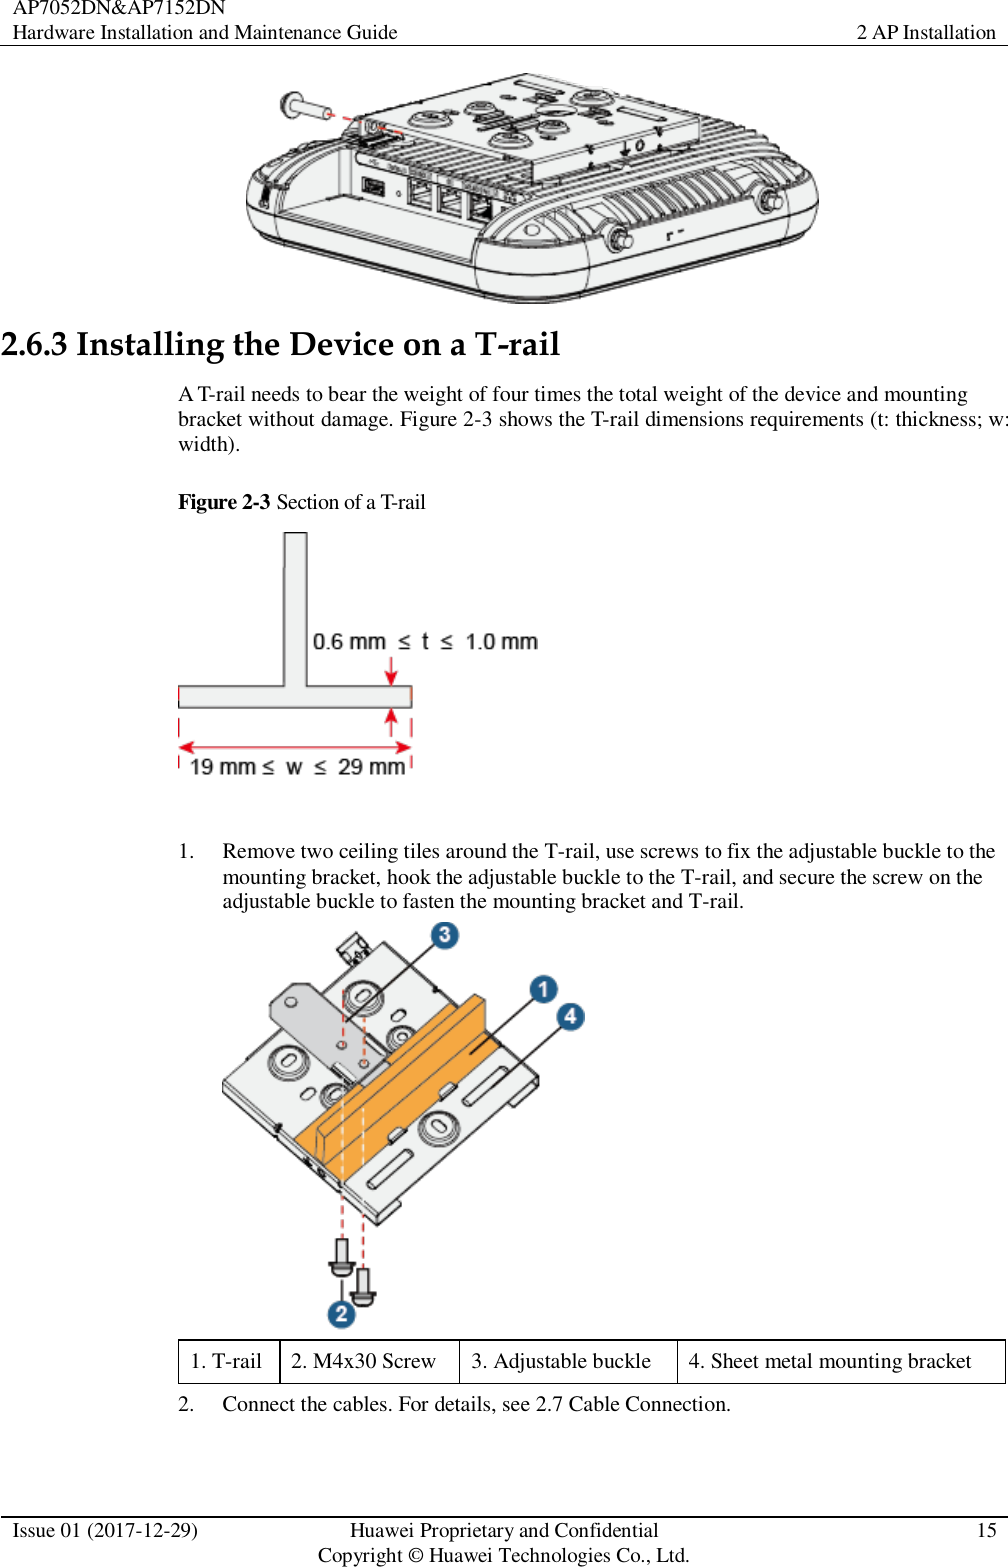 AP7052DN&amp;AP7152DN Hardware Installation and Maintenance Guide 2 AP Installation  Issue 01 (2017-12-29) Huawei Proprietary and Confidential                                     Copyright © Huawei Technologies Co., Ltd. 15   2.6.3 Installing the Device on a T-rail A T-rail needs to bear the weight of four times the total weight of the device and mounting bracket without damage. Figure 2-3 shows the T-rail dimensions requirements (t: thickness; w: width). Figure 2-3 Section of a T-rail   1. Remove two ceiling tiles around the T-rail, use screws to fix the adjustable buckle to the mounting bracket, hook the adjustable buckle to the T-rail, and secure the screw on the adjustable buckle to fasten the mounting bracket and T-rail.  1. T-rail 2. M4x30 Screw 3. Adjustable buckle 4. Sheet metal mounting bracket 2. Connect the cables. For details, see 2.7 Cable Connection. 